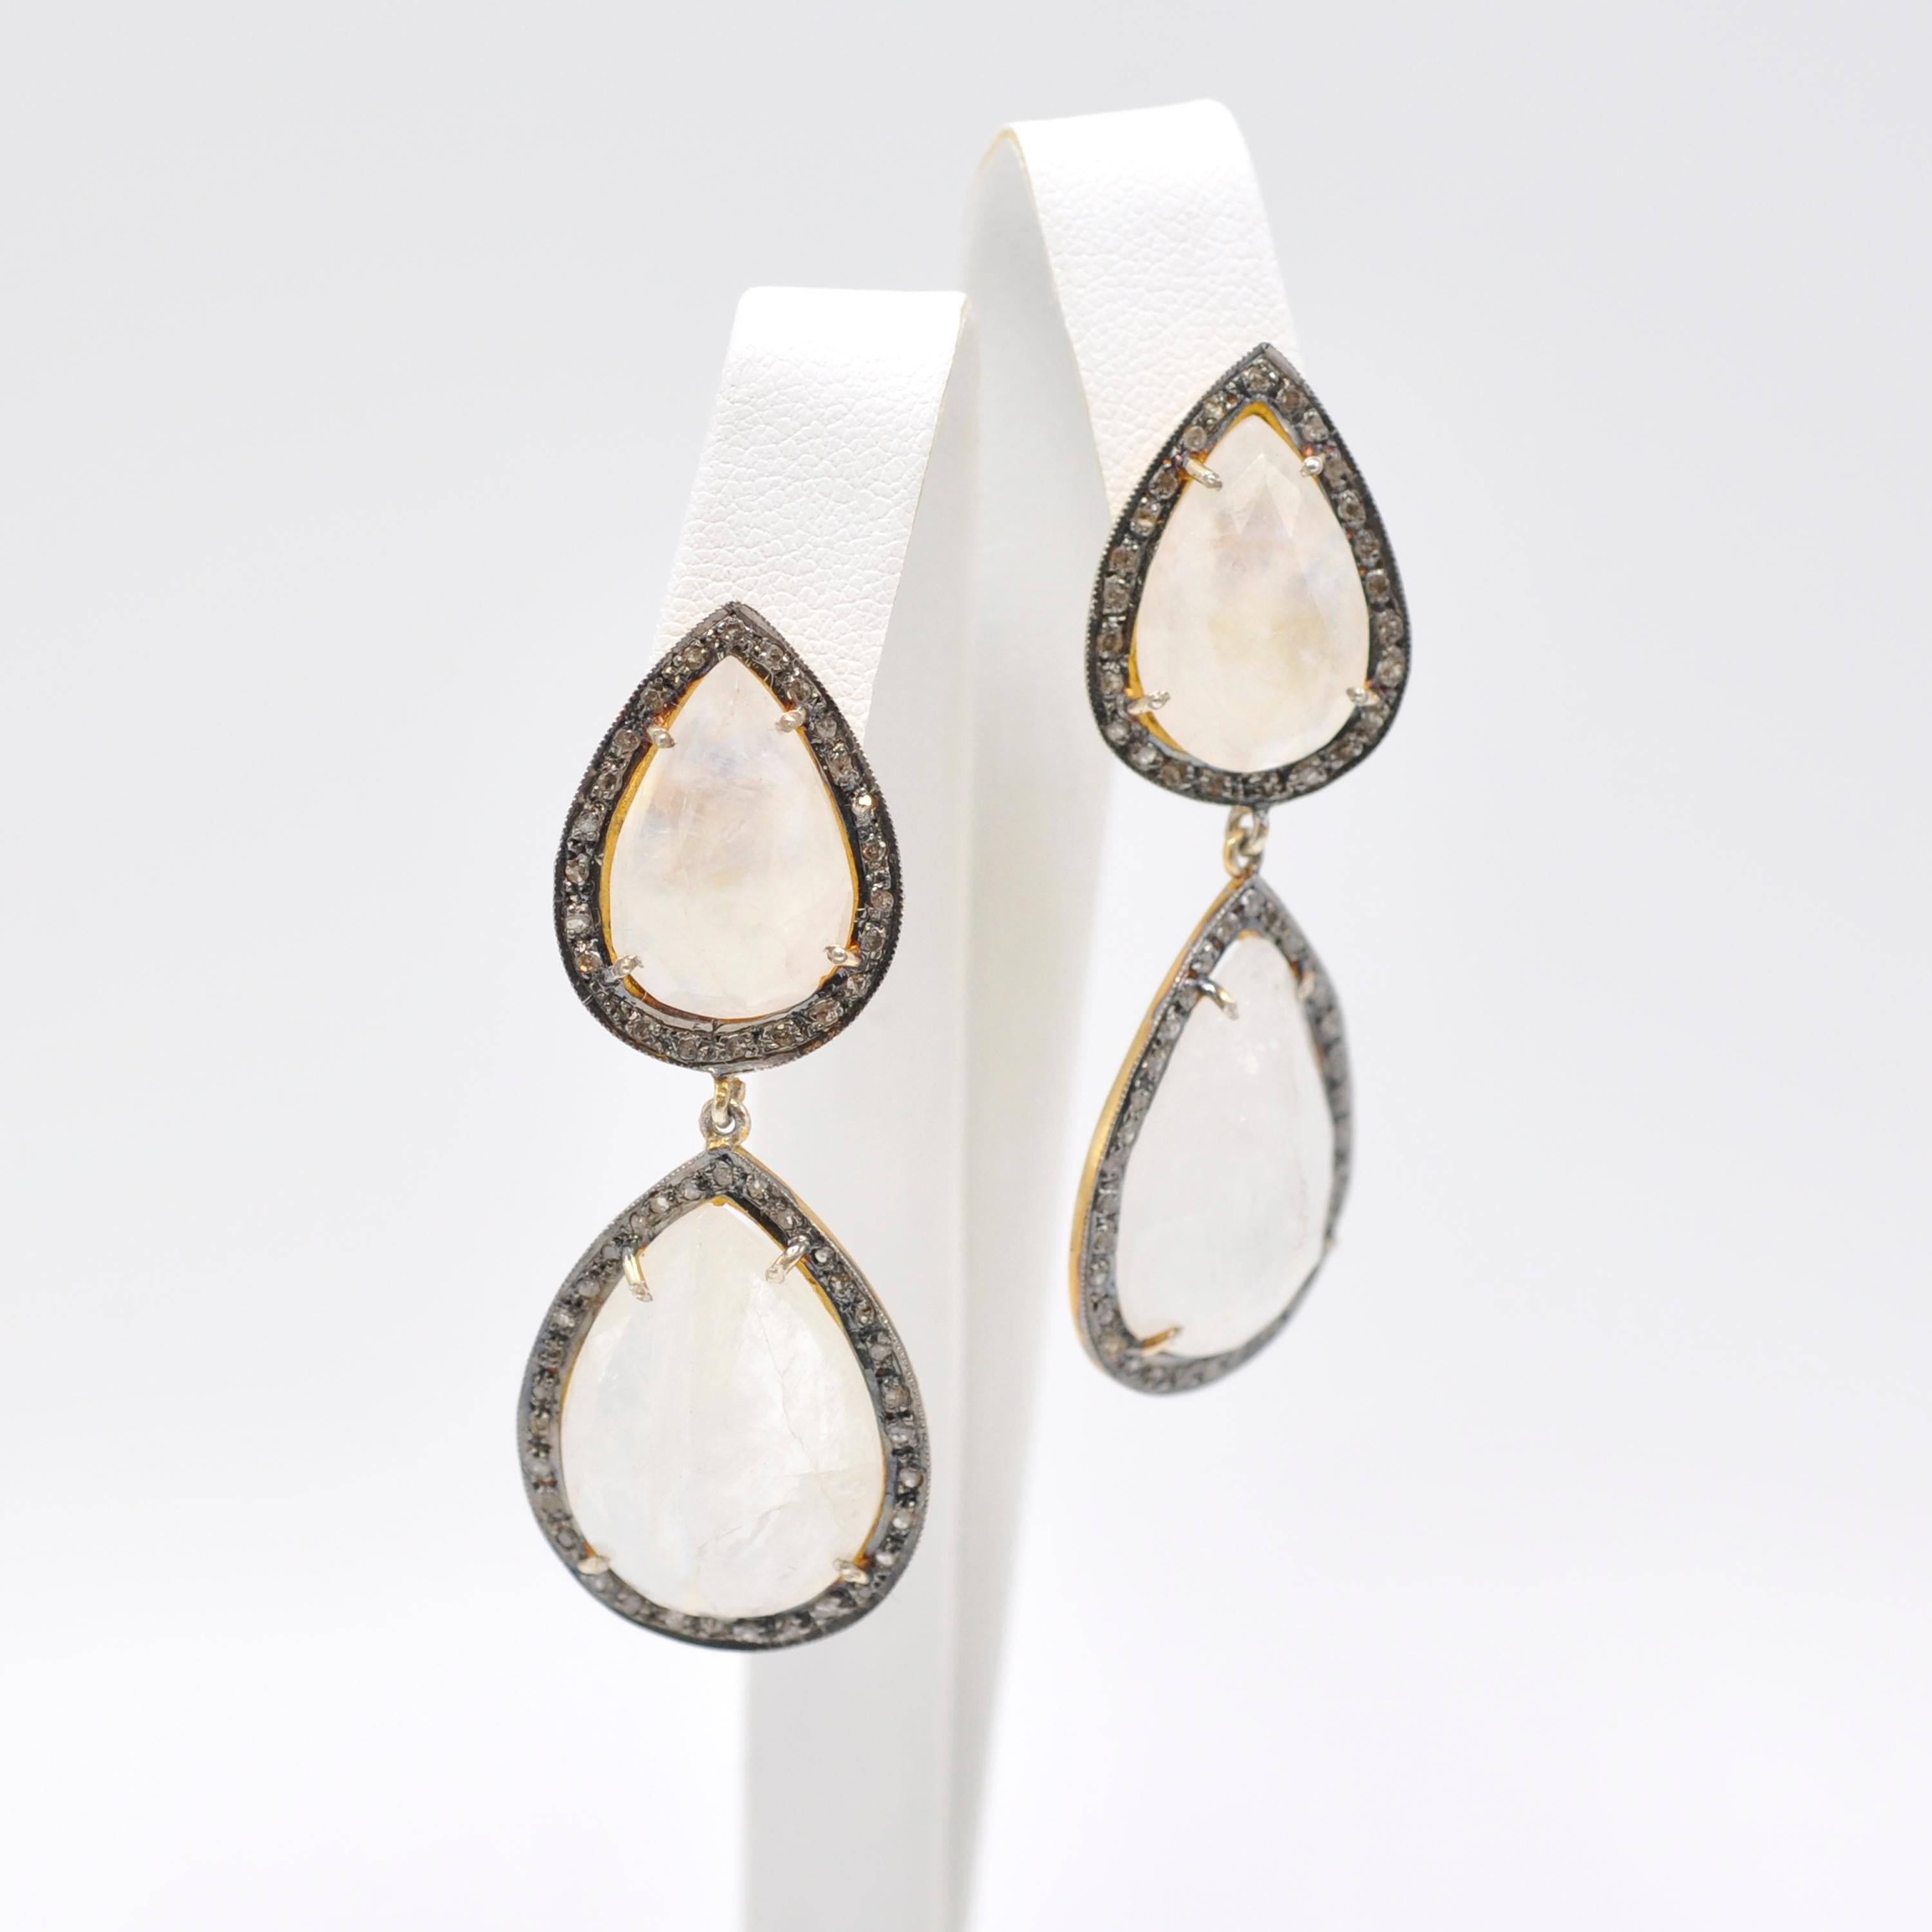 We love these bohemian moonstone earrings!

4 large pear shaped moonstones and .5 cts trillion cut diamonds set in silver that is gilt on the back of the earring so that silver shows on the front and gold on the back. The milky white moonstones